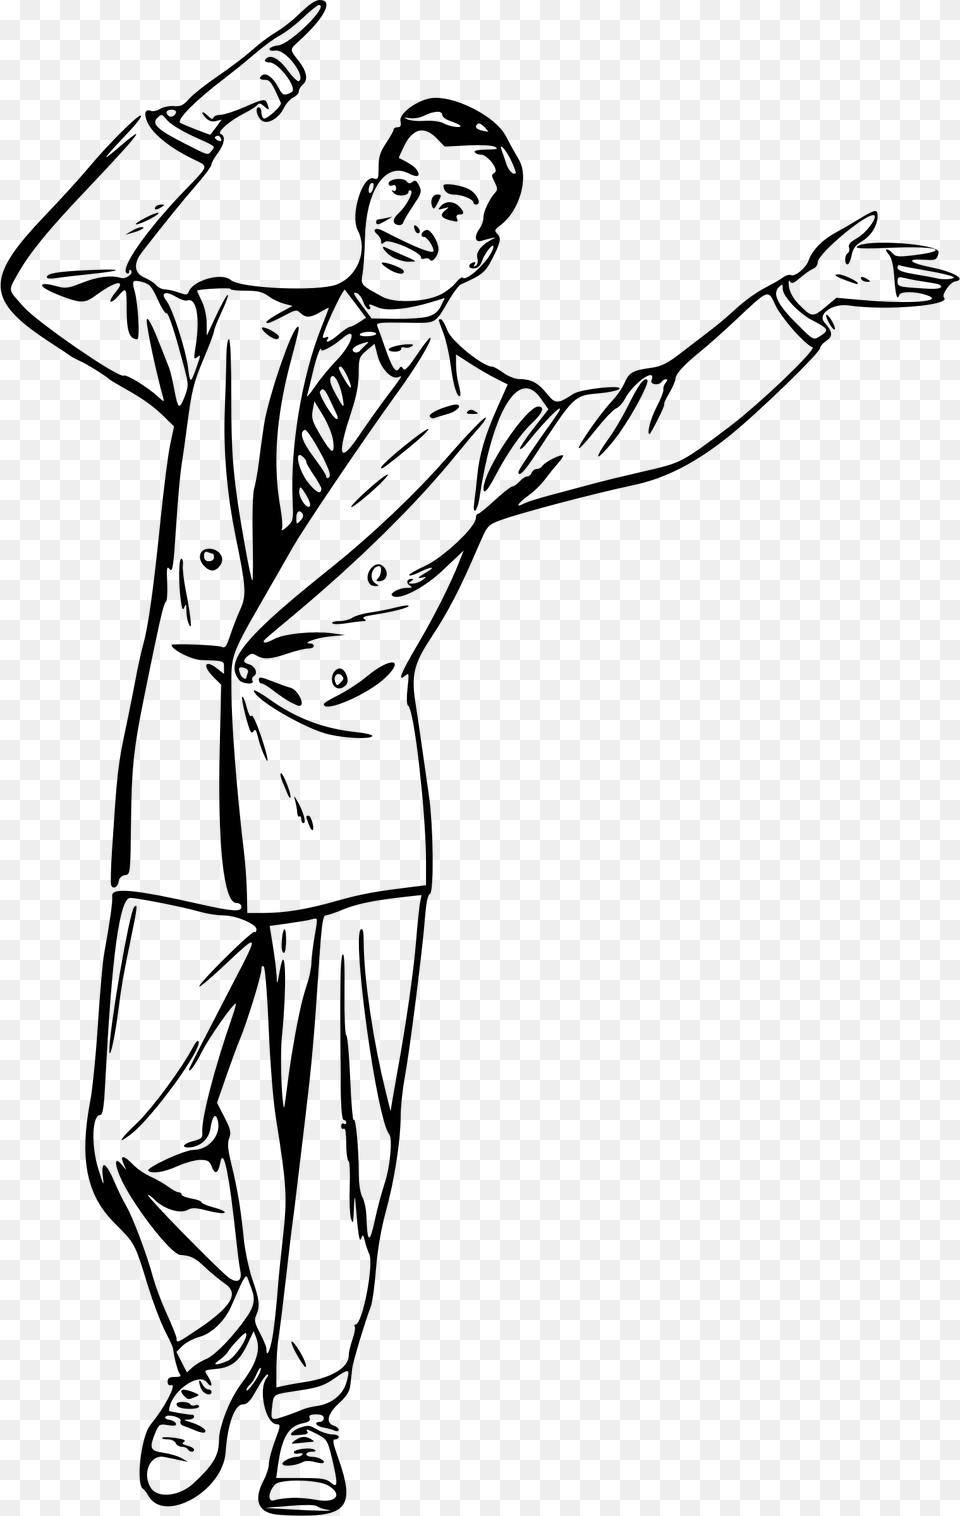 This Icons Design Of Man Dancing, Gray Png